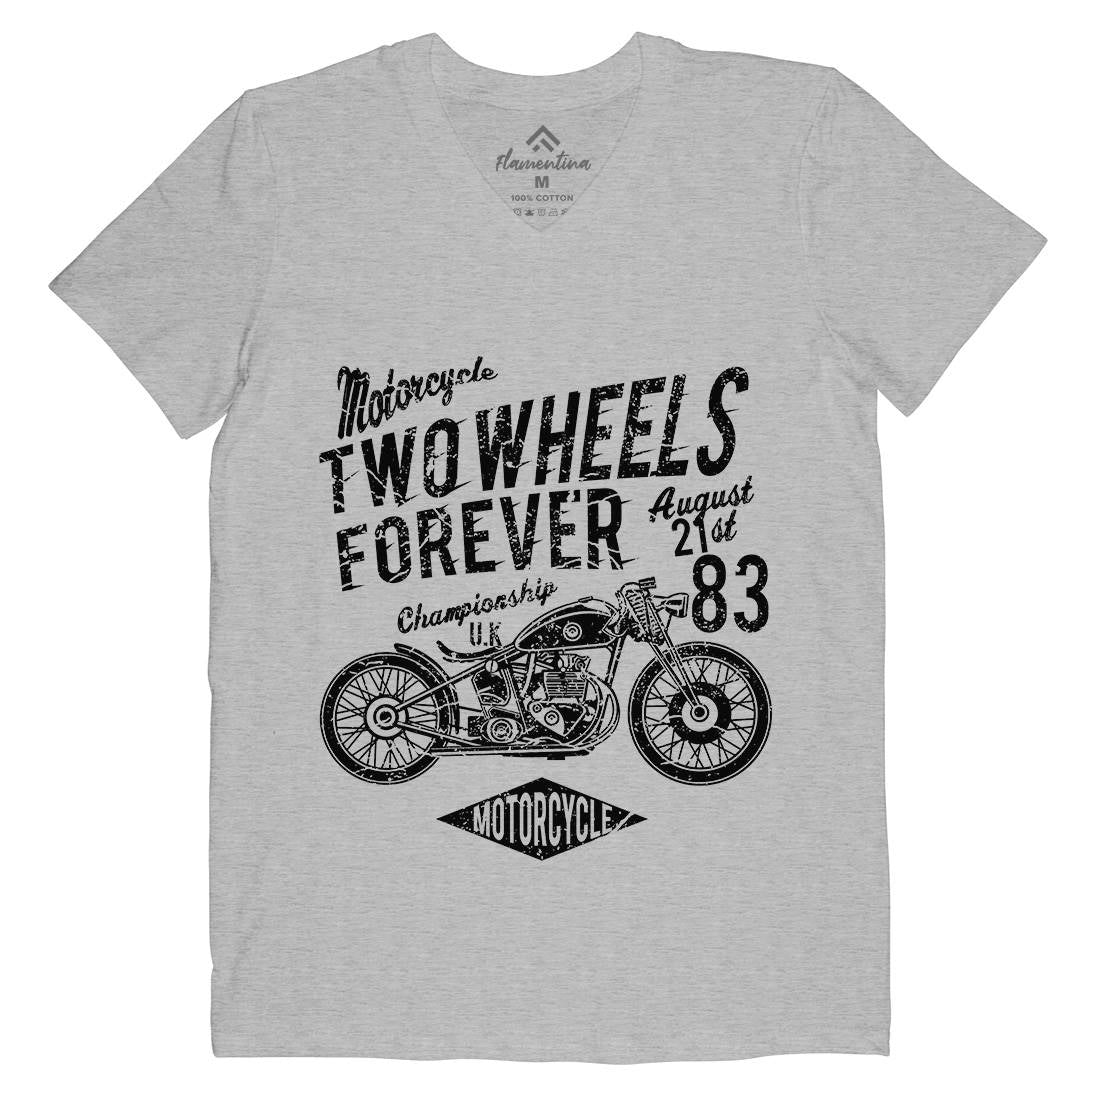 Two Wheels Forever Mens Organic V-Neck T-Shirt Motorcycles A186